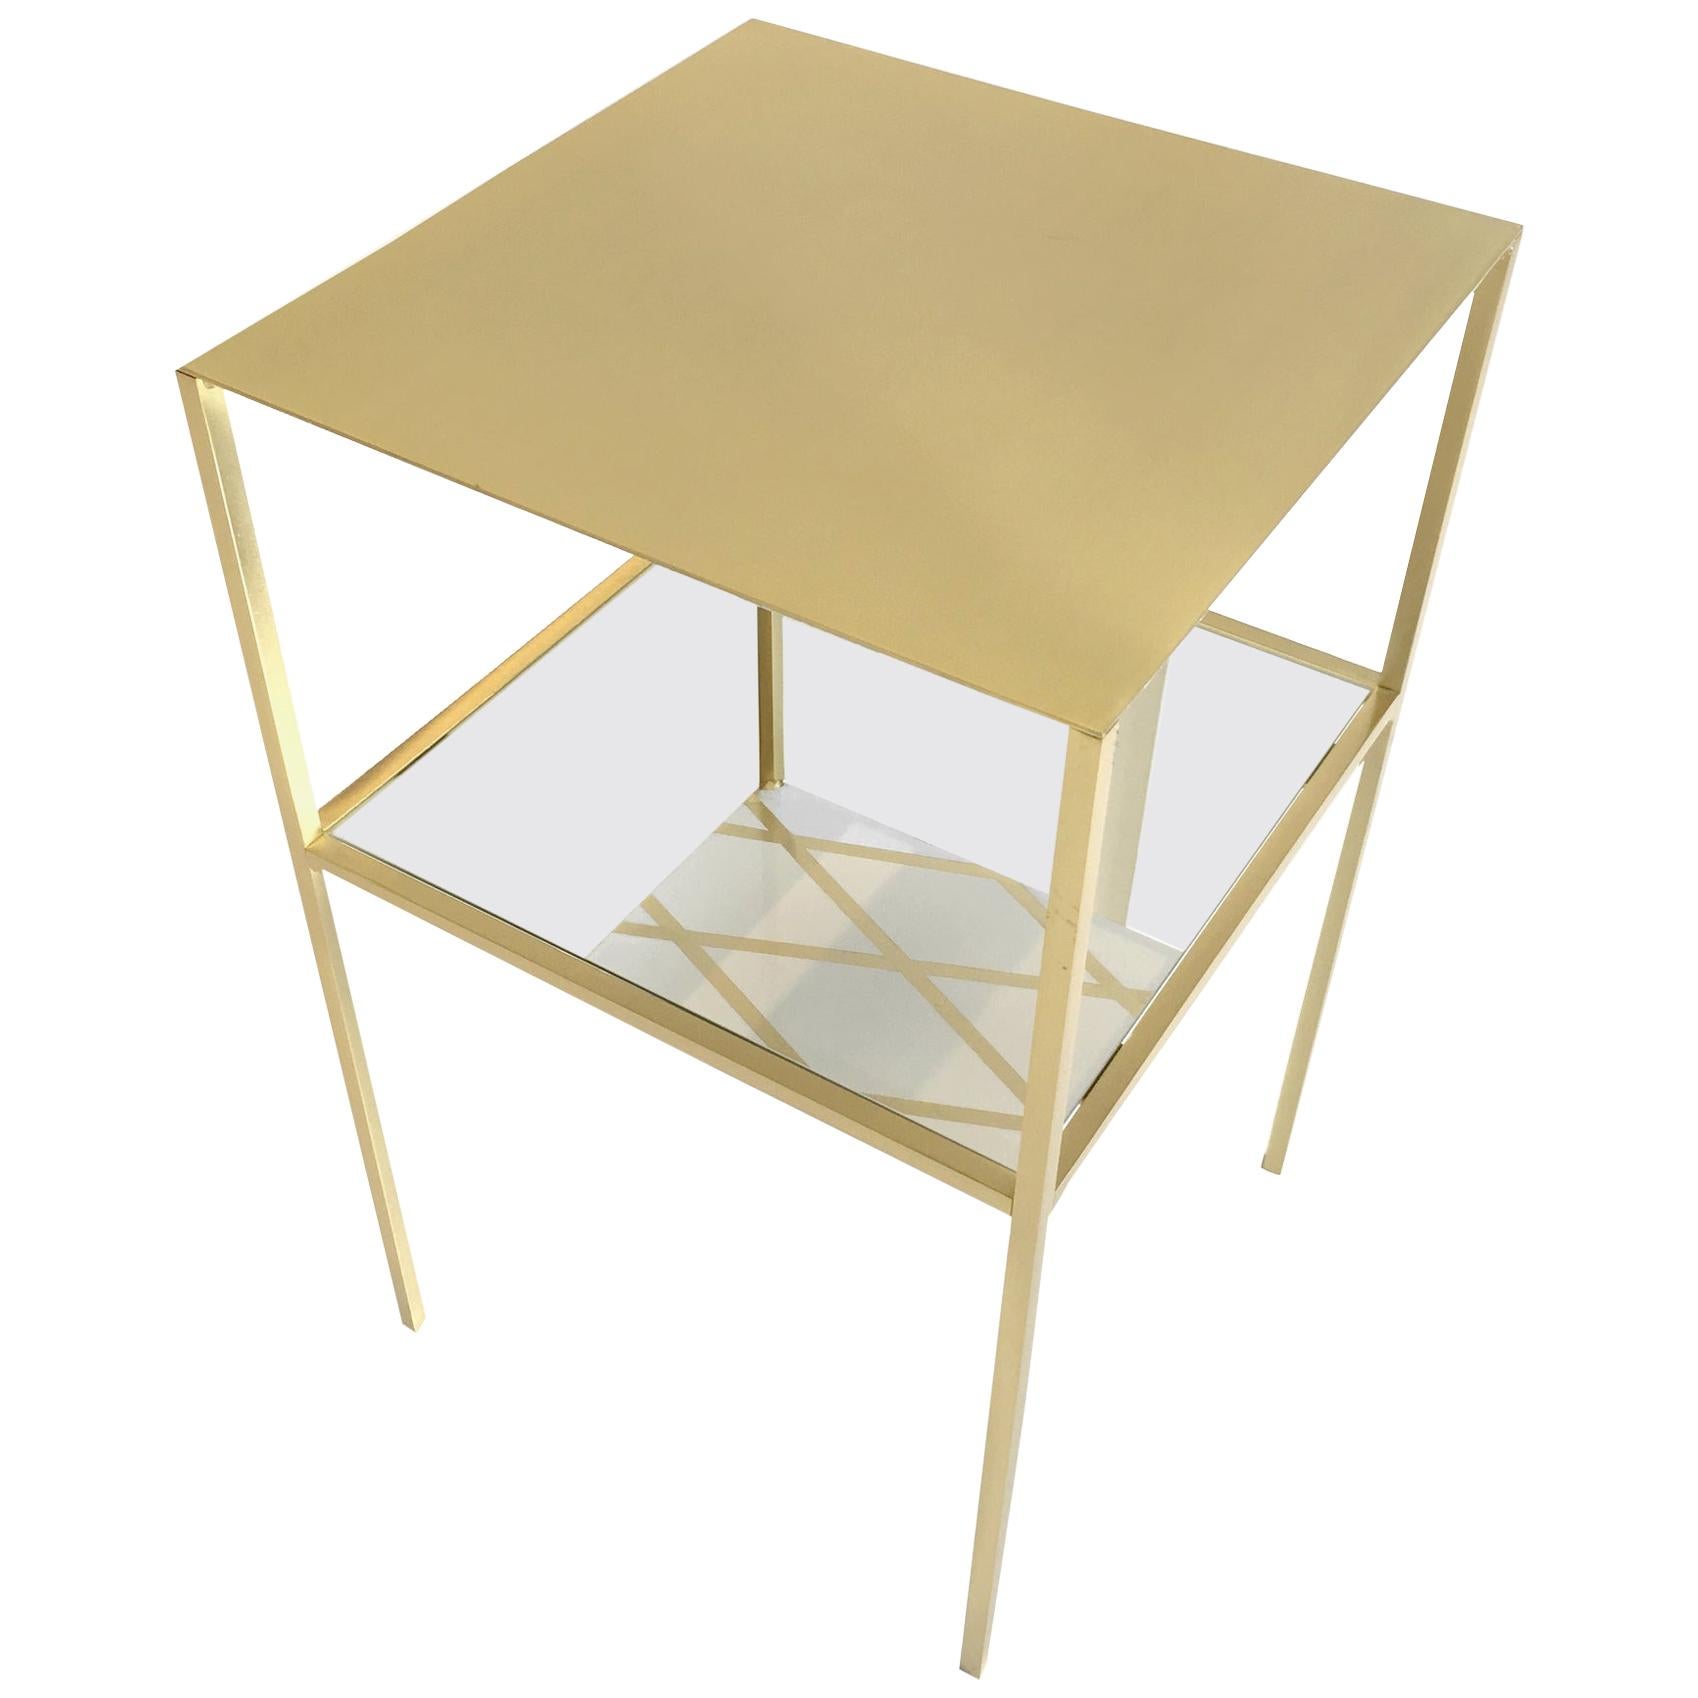 In Stock in Los Angeles, Tabu Square Gold and Brass Coffee Table, Made in Italy